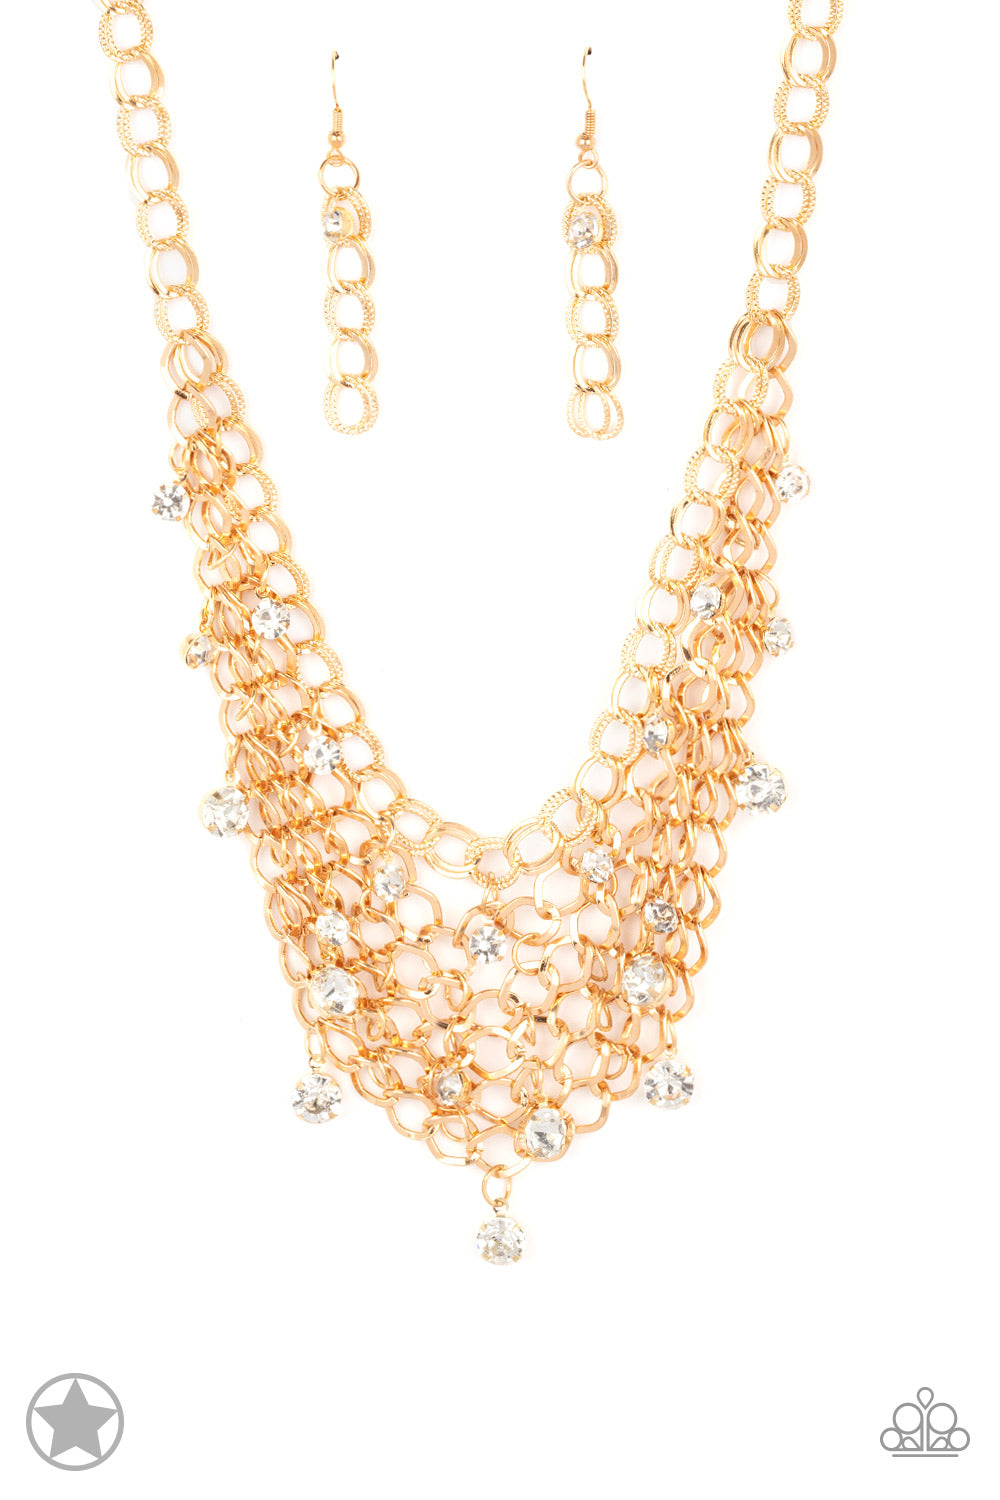 Fishing for Compliments - Gold necklace 540